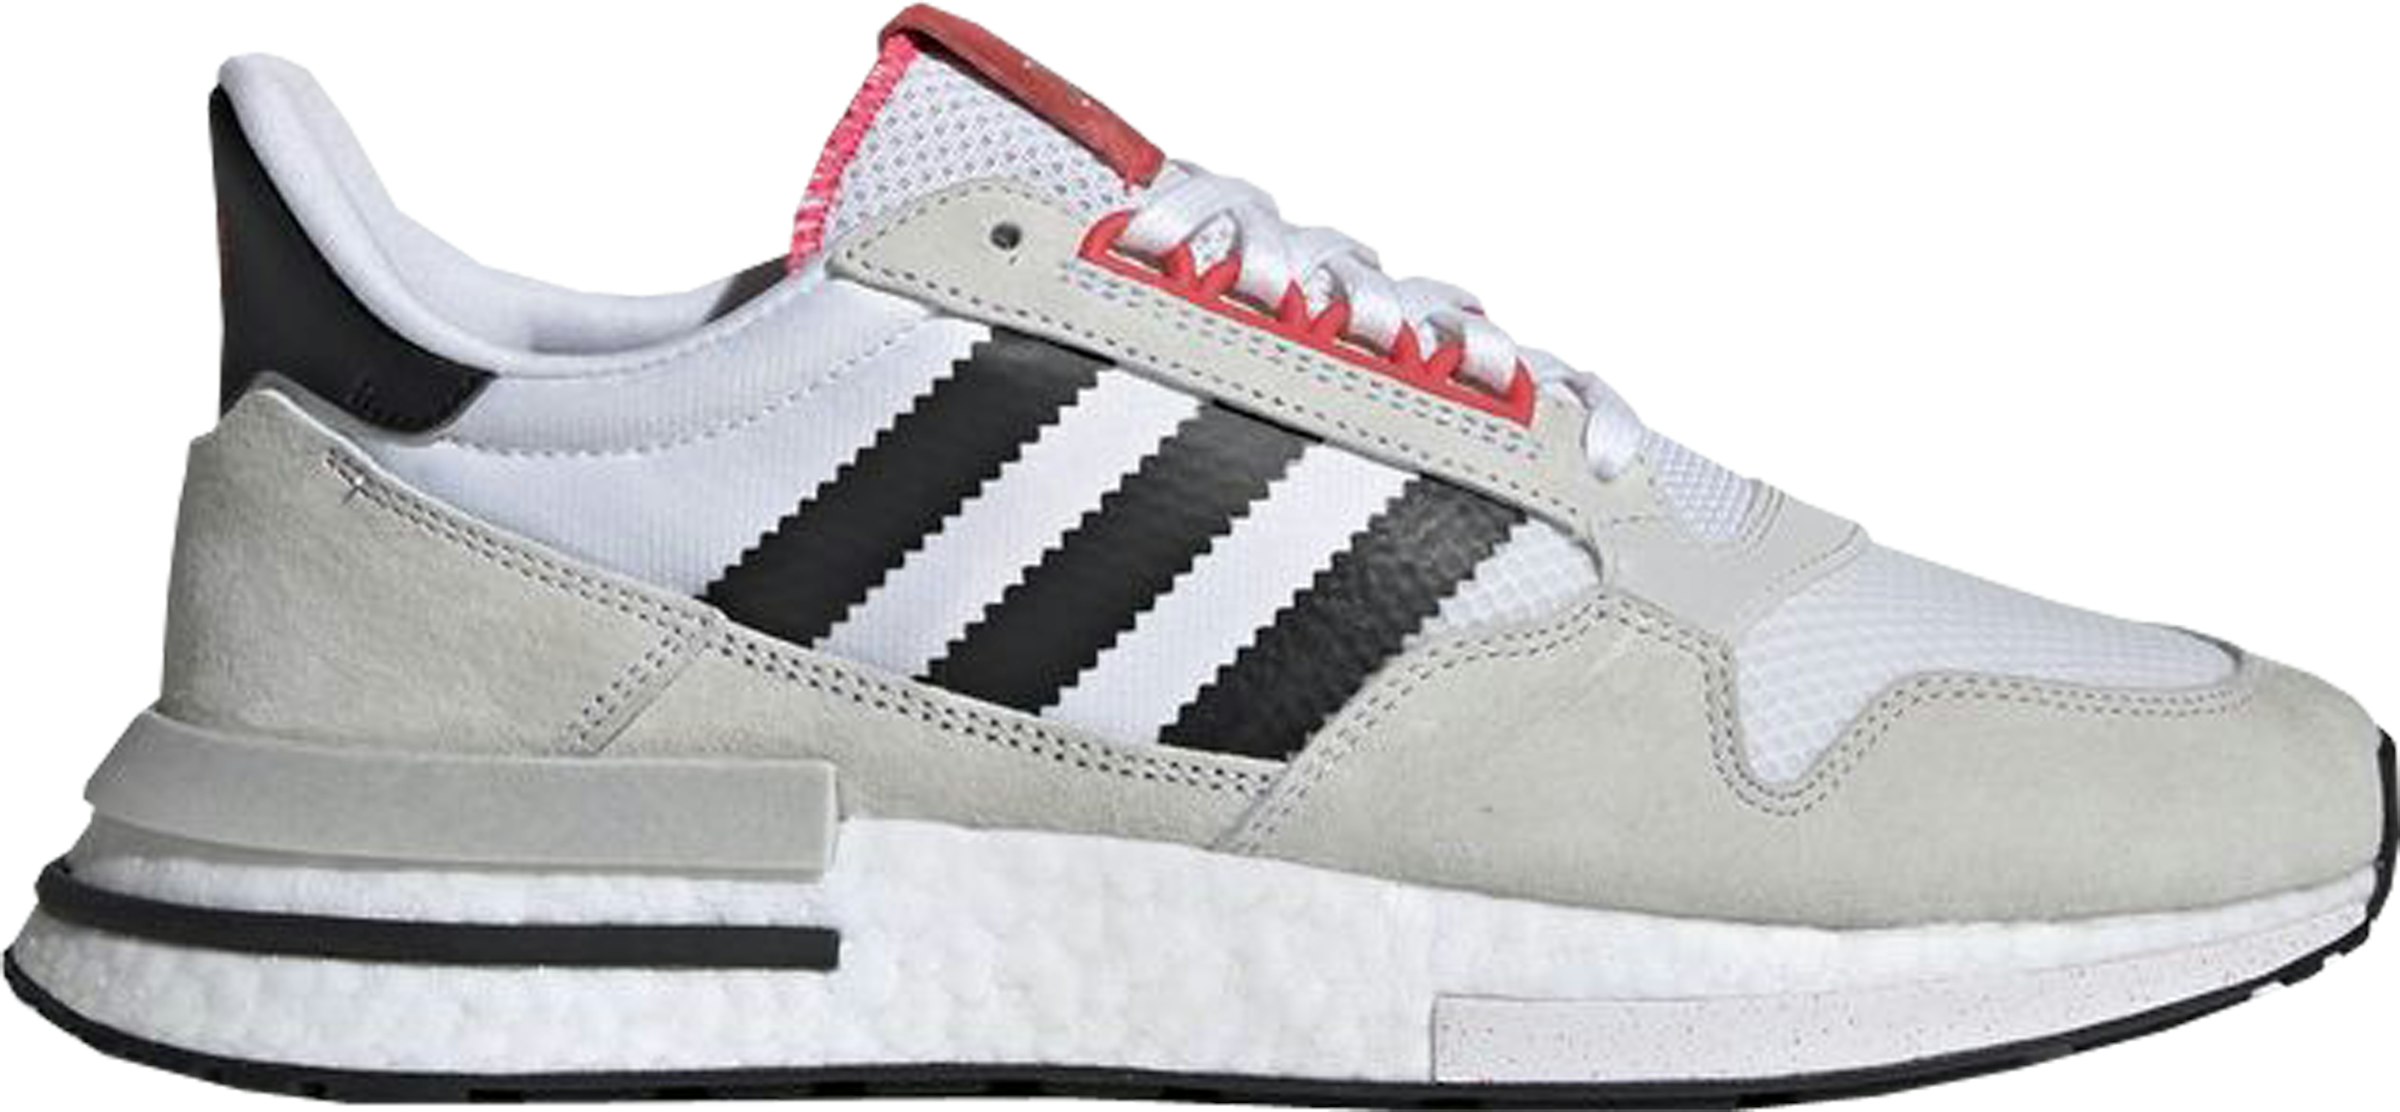 adidas ZX500 Forever Men's - G27577 US